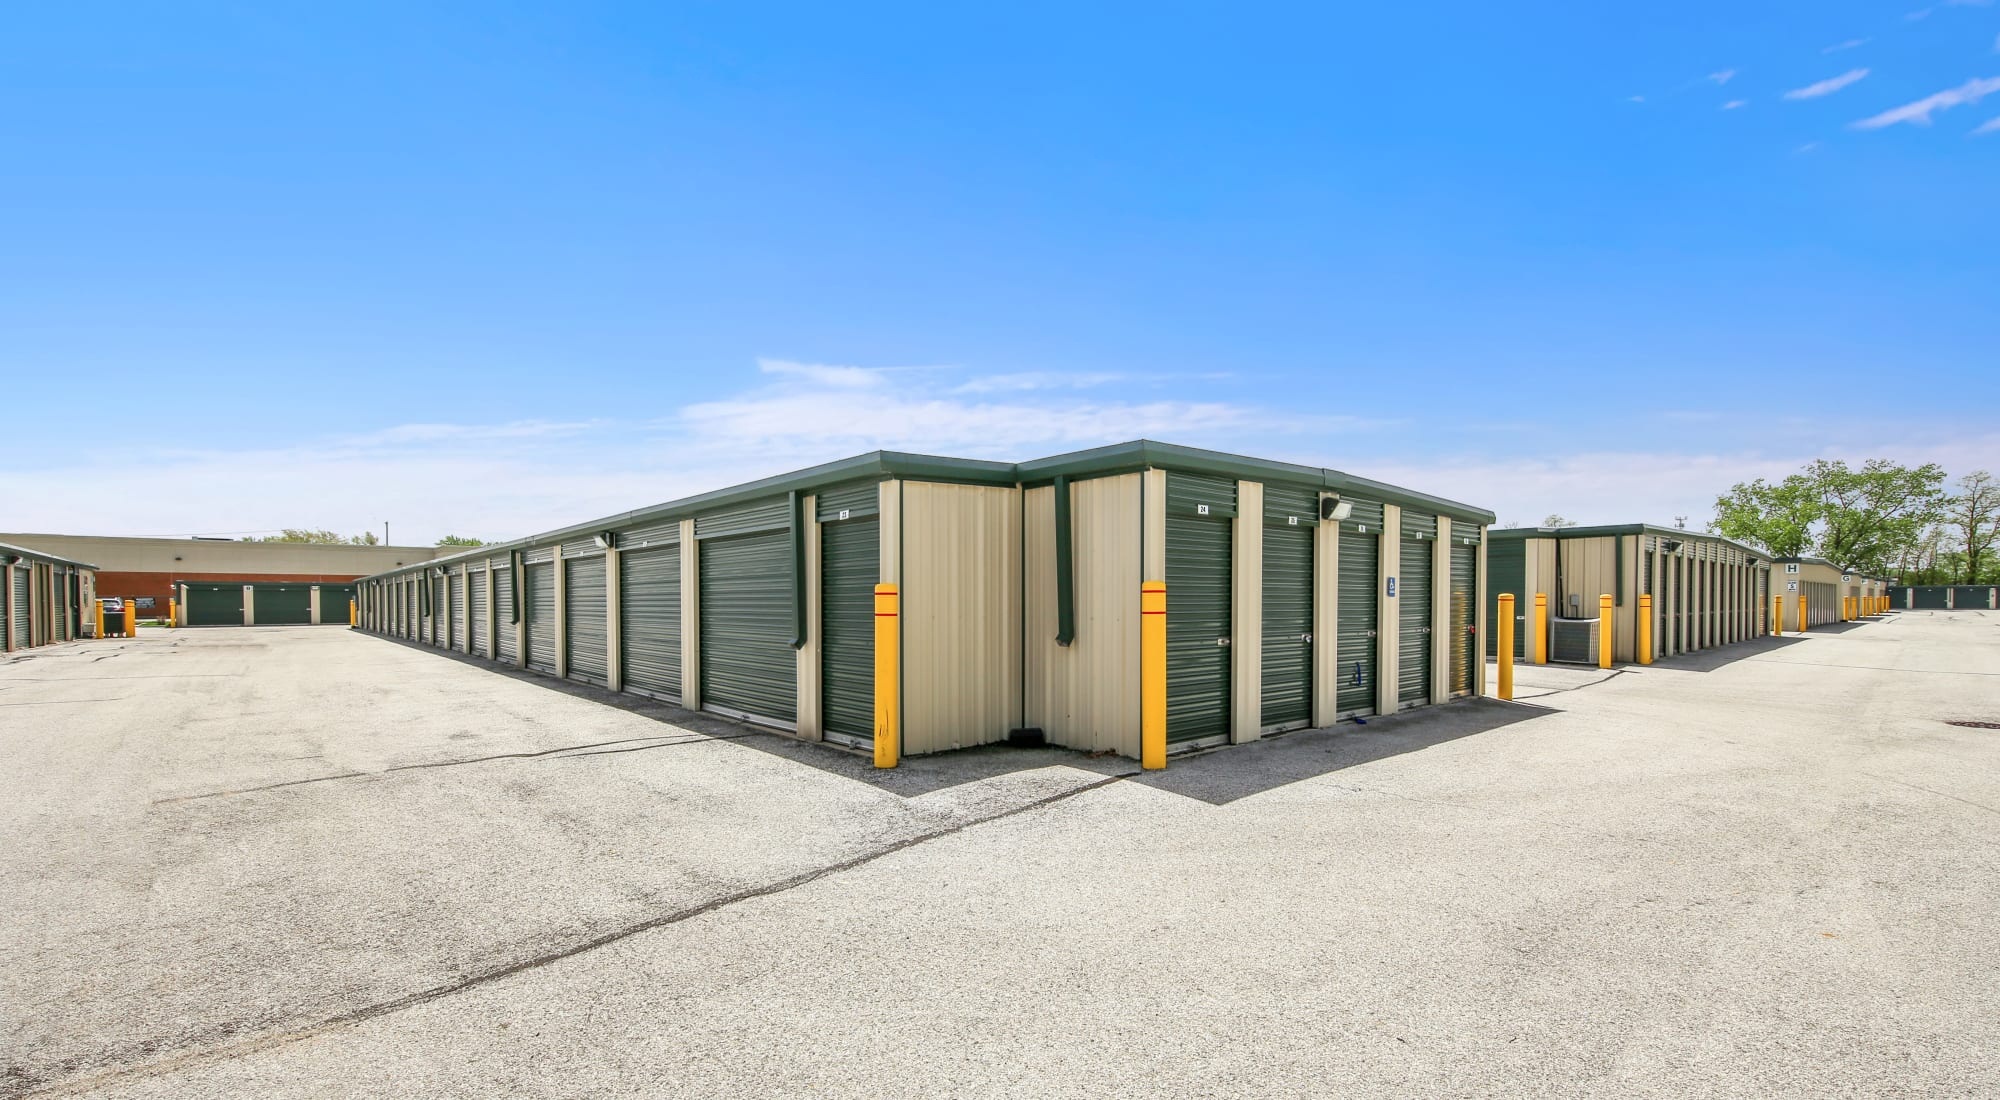 How you can use storage units to build your business